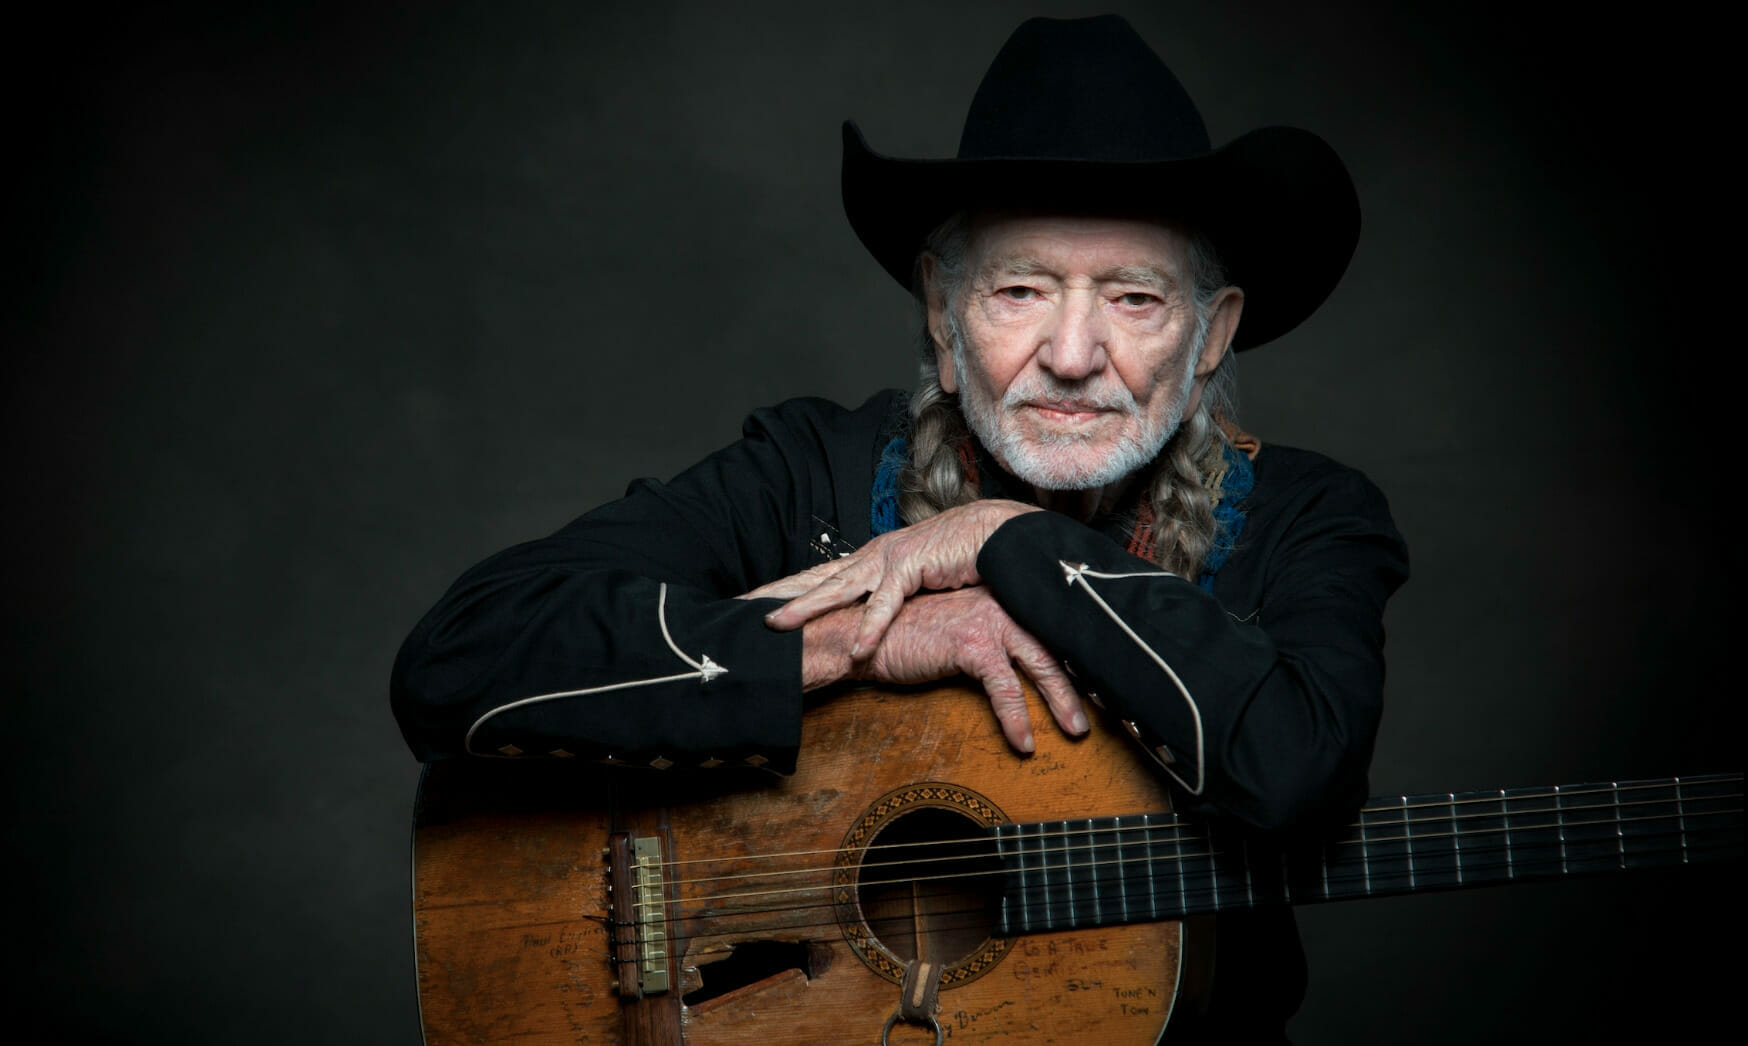 Willie Nelson S Outlaw Music Festival Tour To Return With Robert Plant And Alison Krauss The